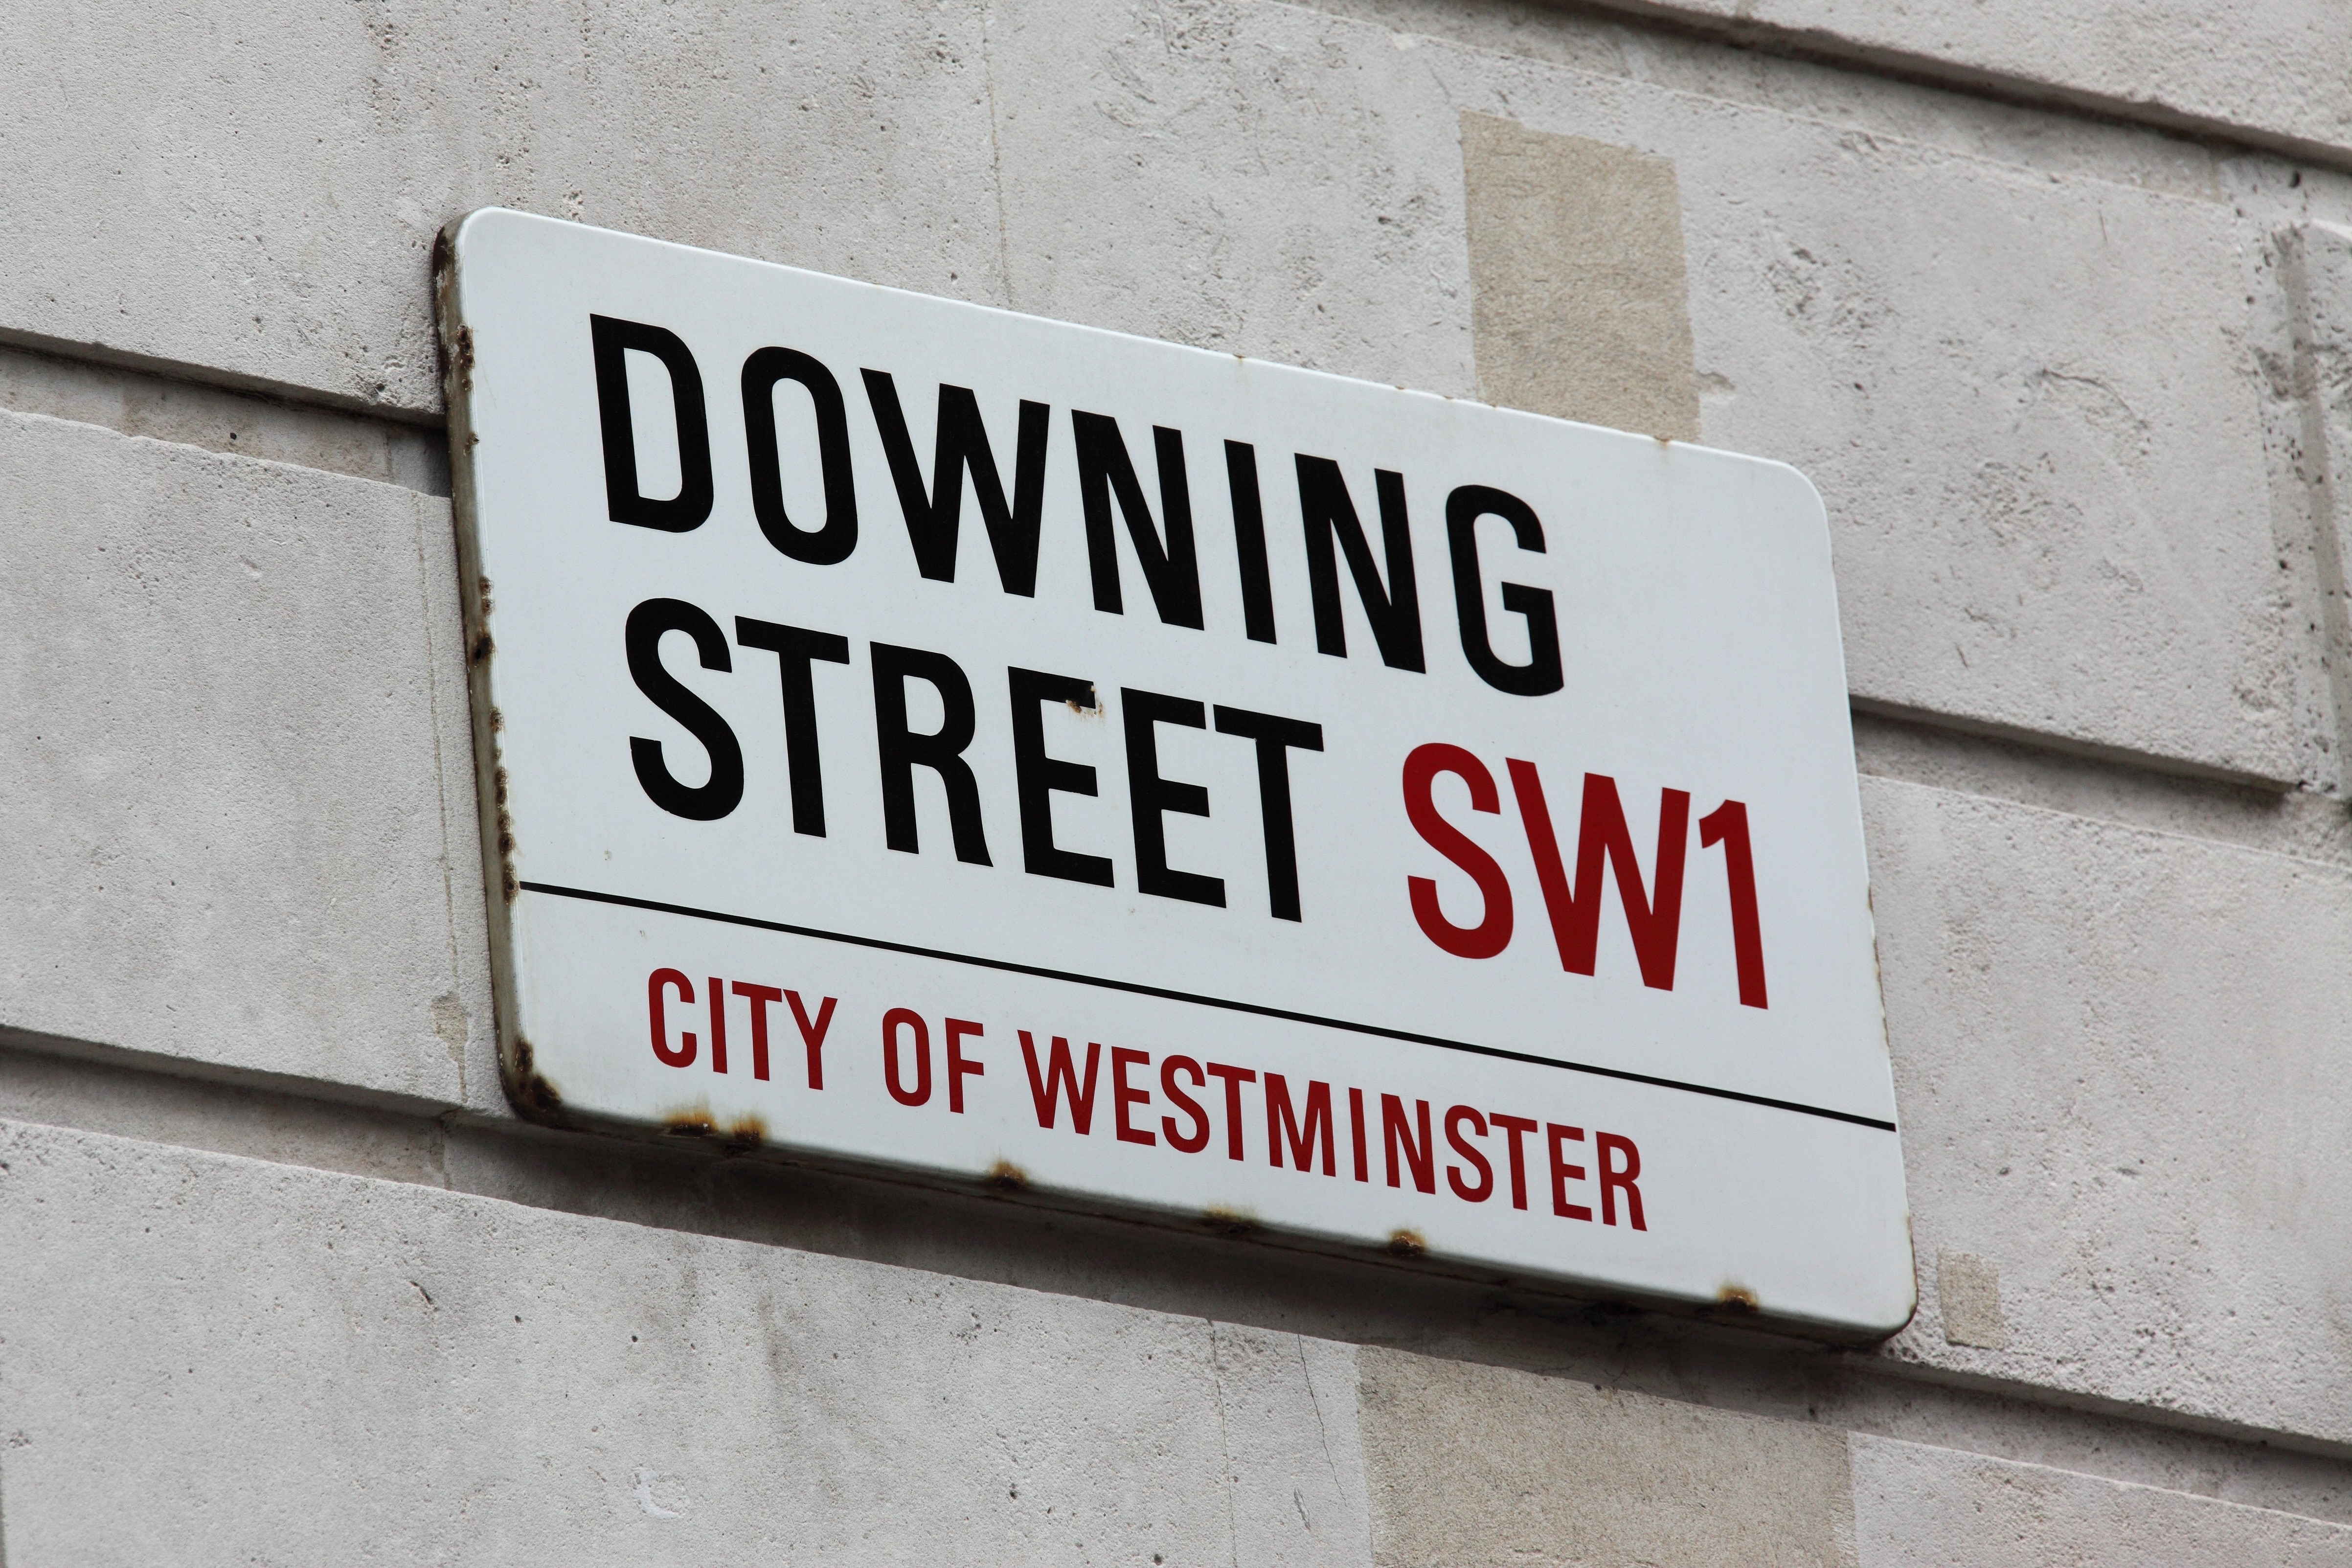 Downing Street SW1 signage on white concrete wall